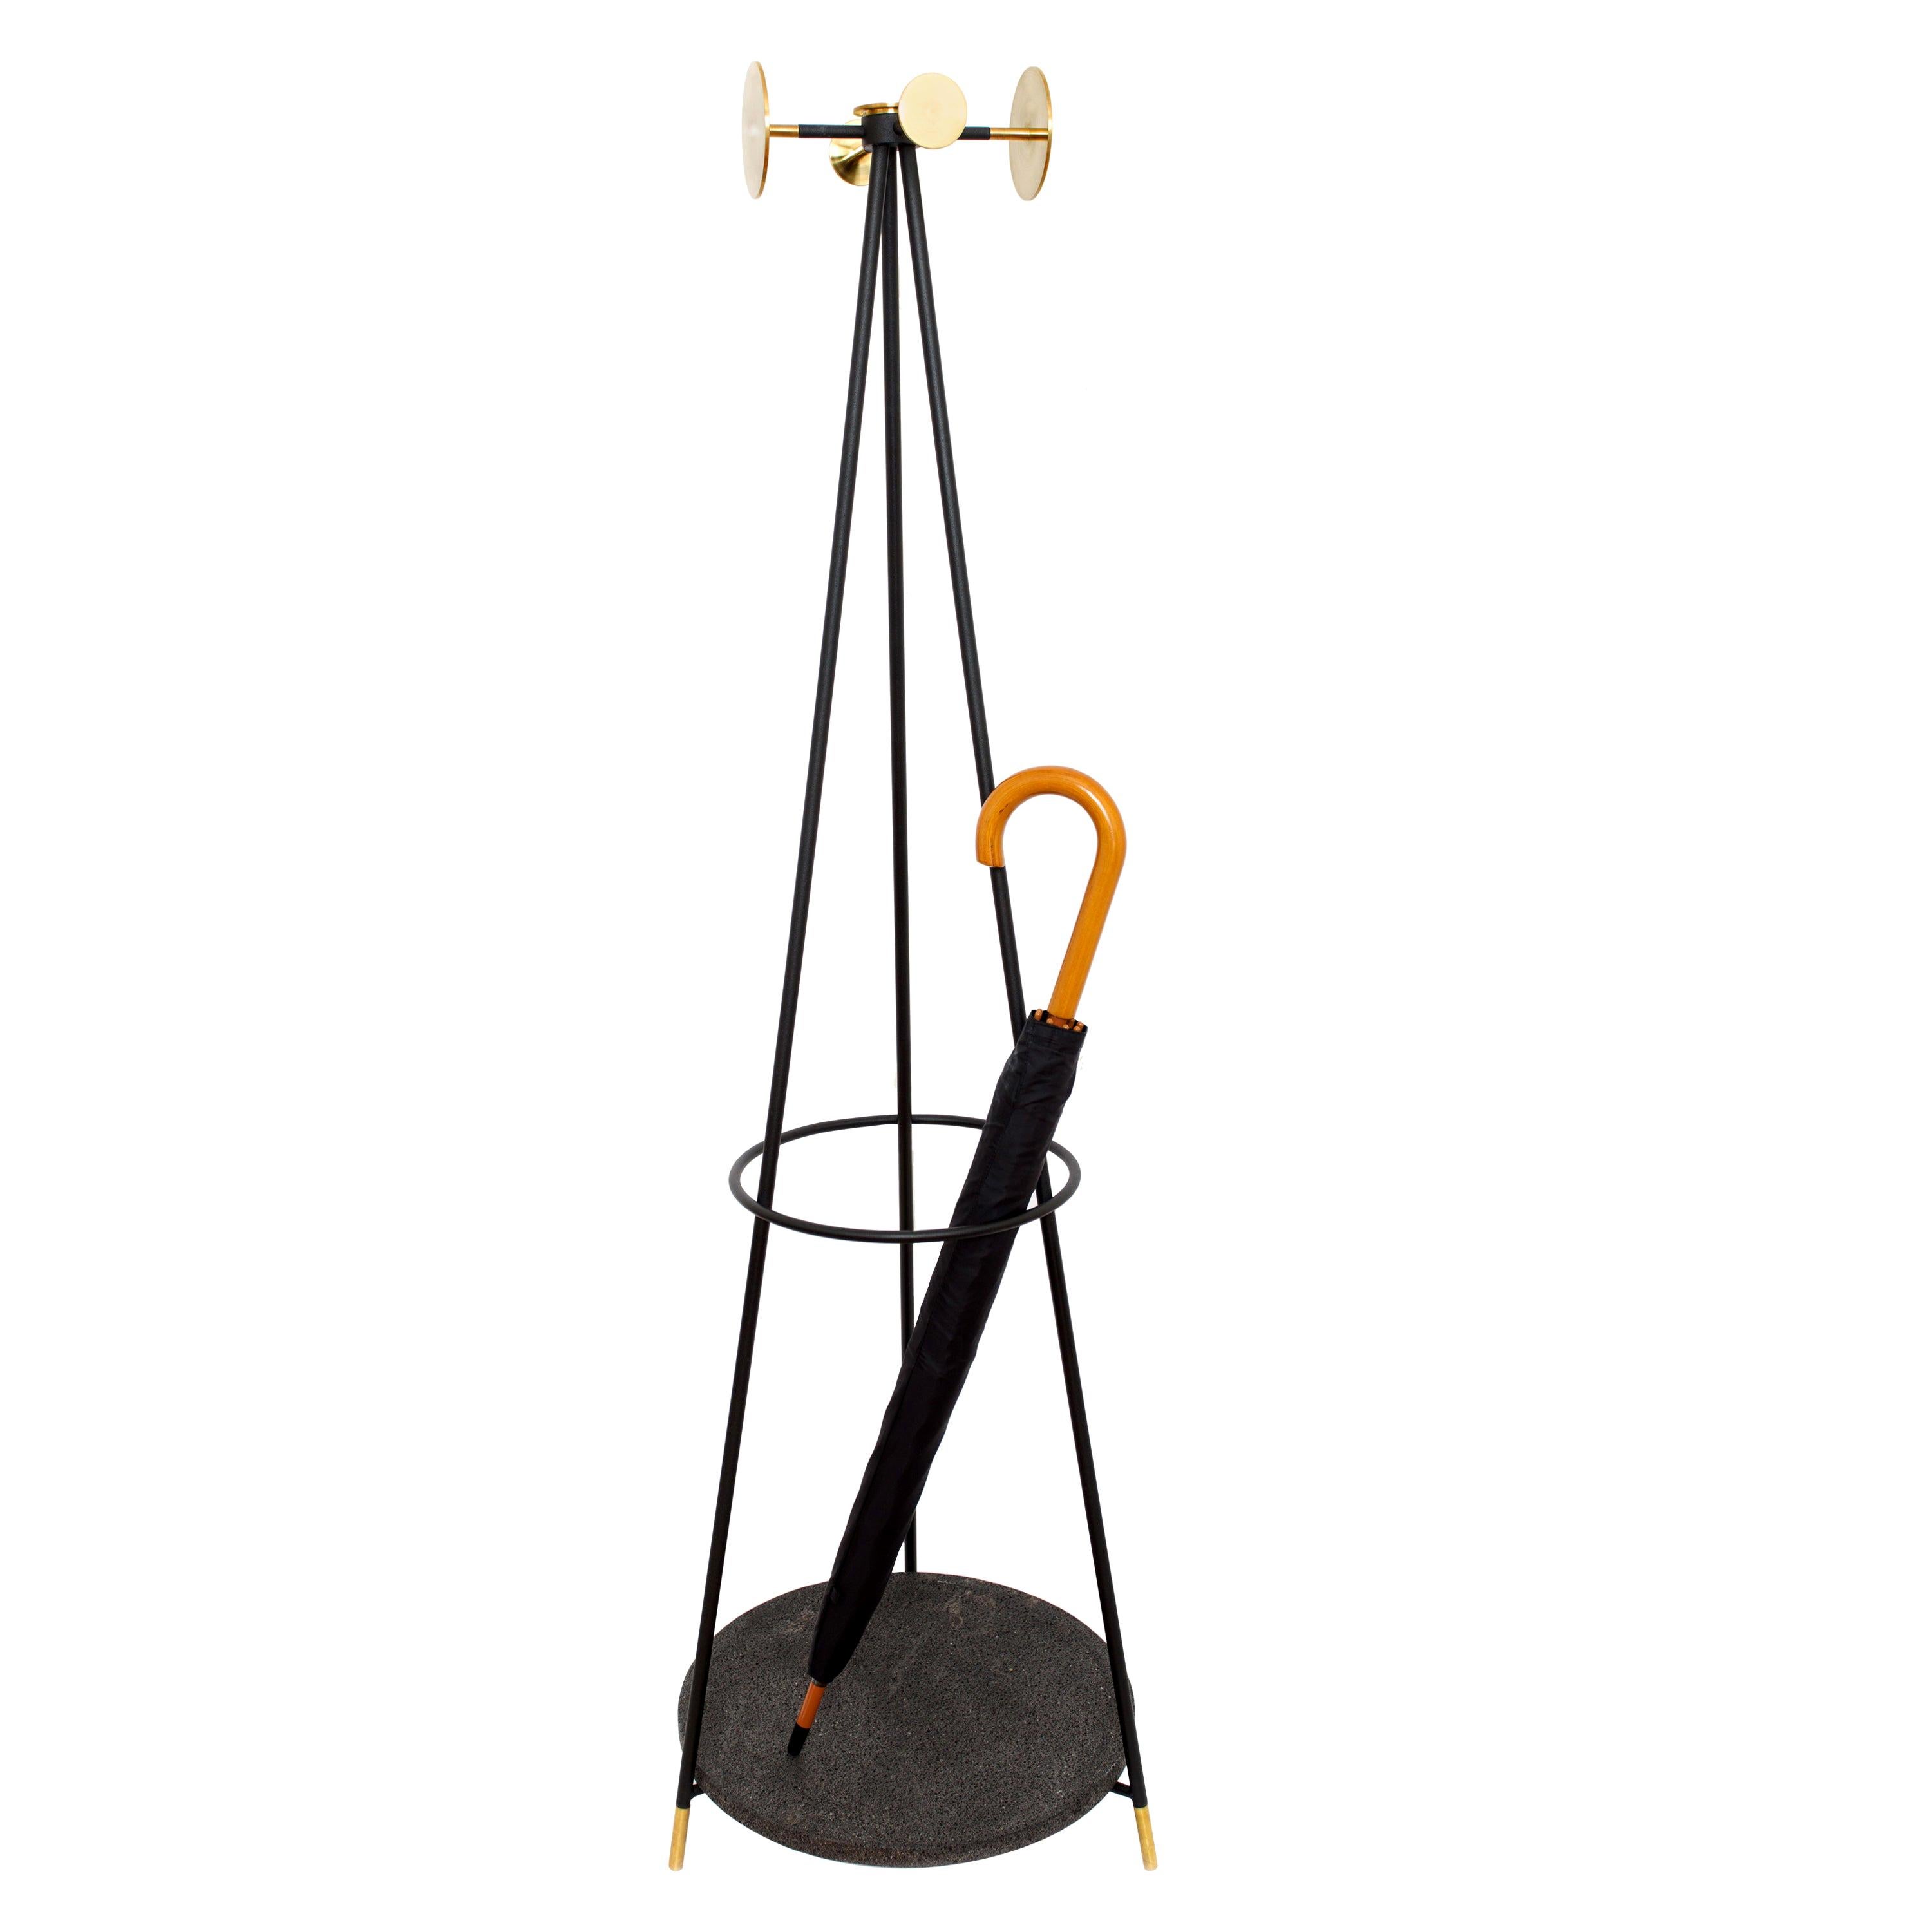 The function of the hand carved lava stone dish at the bottom is to absorb rainwater from recently used umbrellas. The hooks and gold details of this coat stand are made of turned brass and the rest is made of powder-coated metal bar in black. This